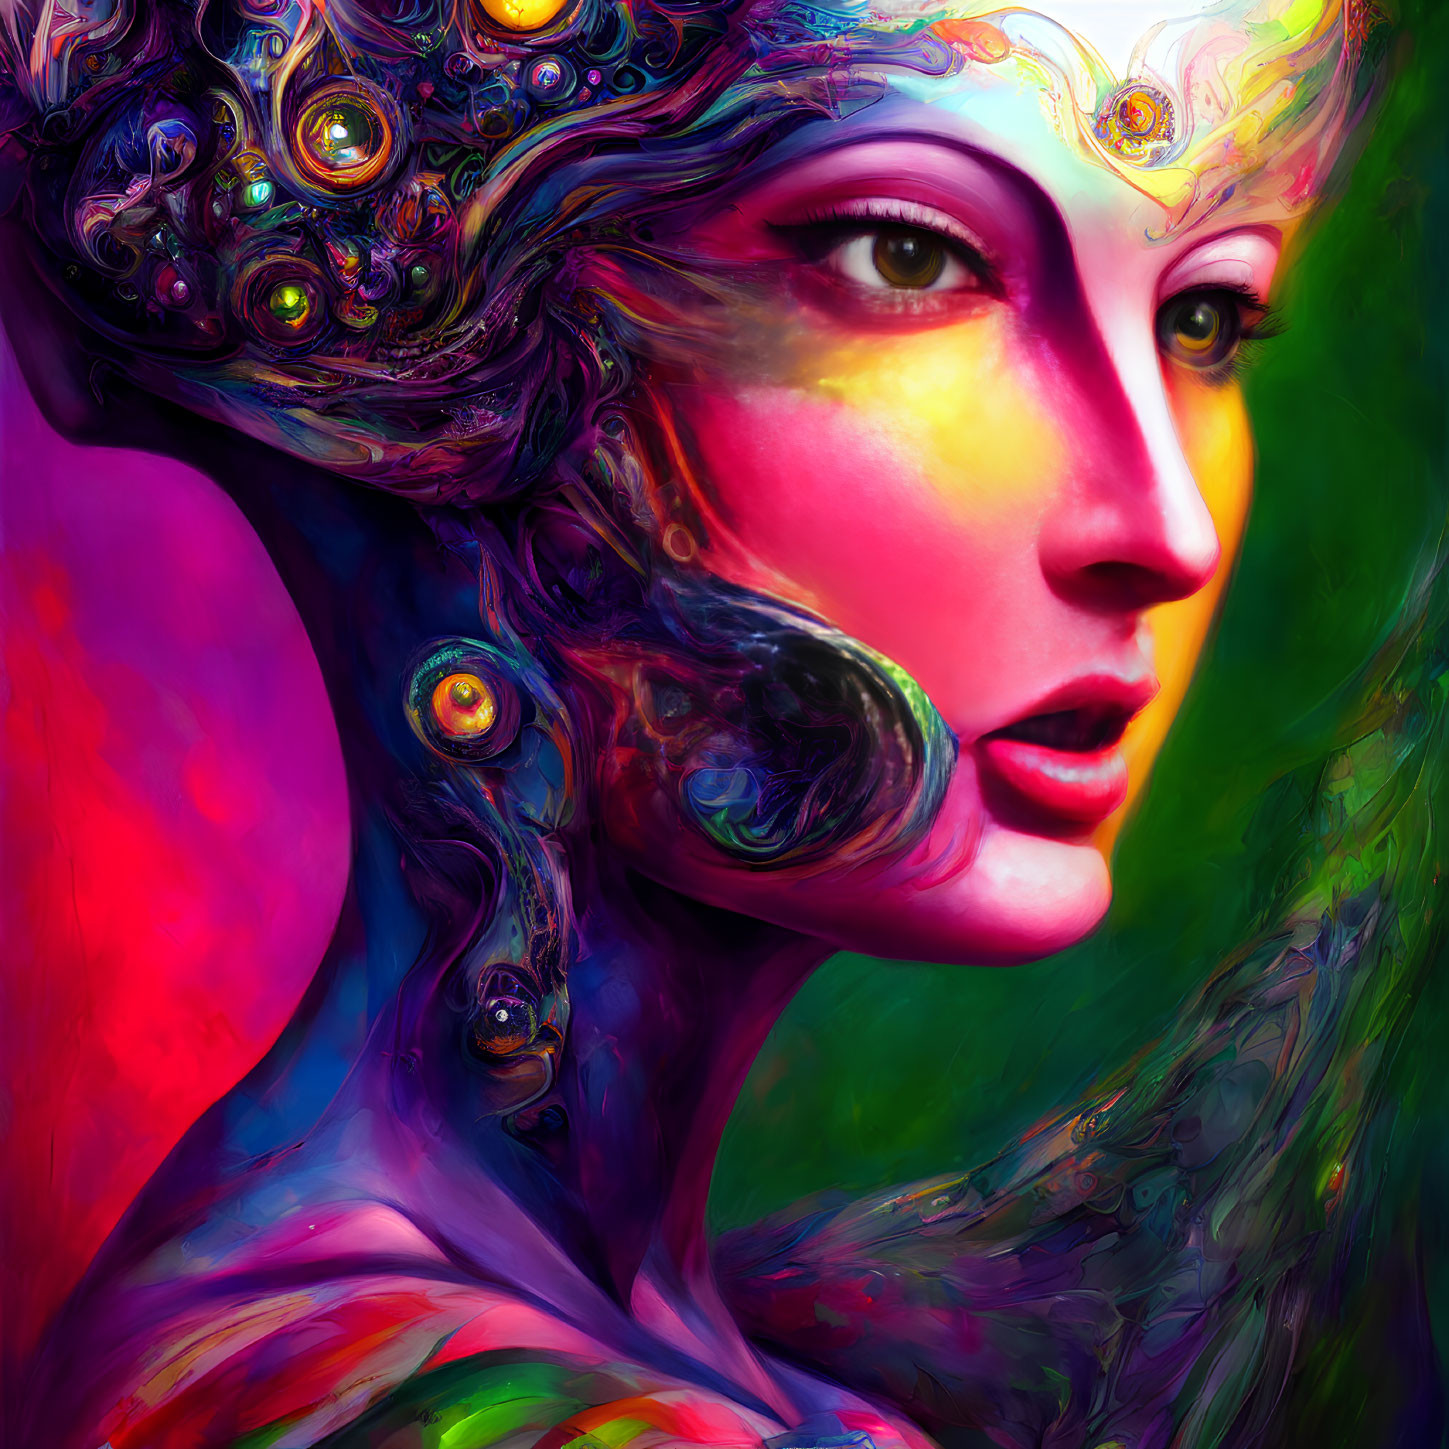 Colorful abstract digital artwork of female figure with swirling designs on skin